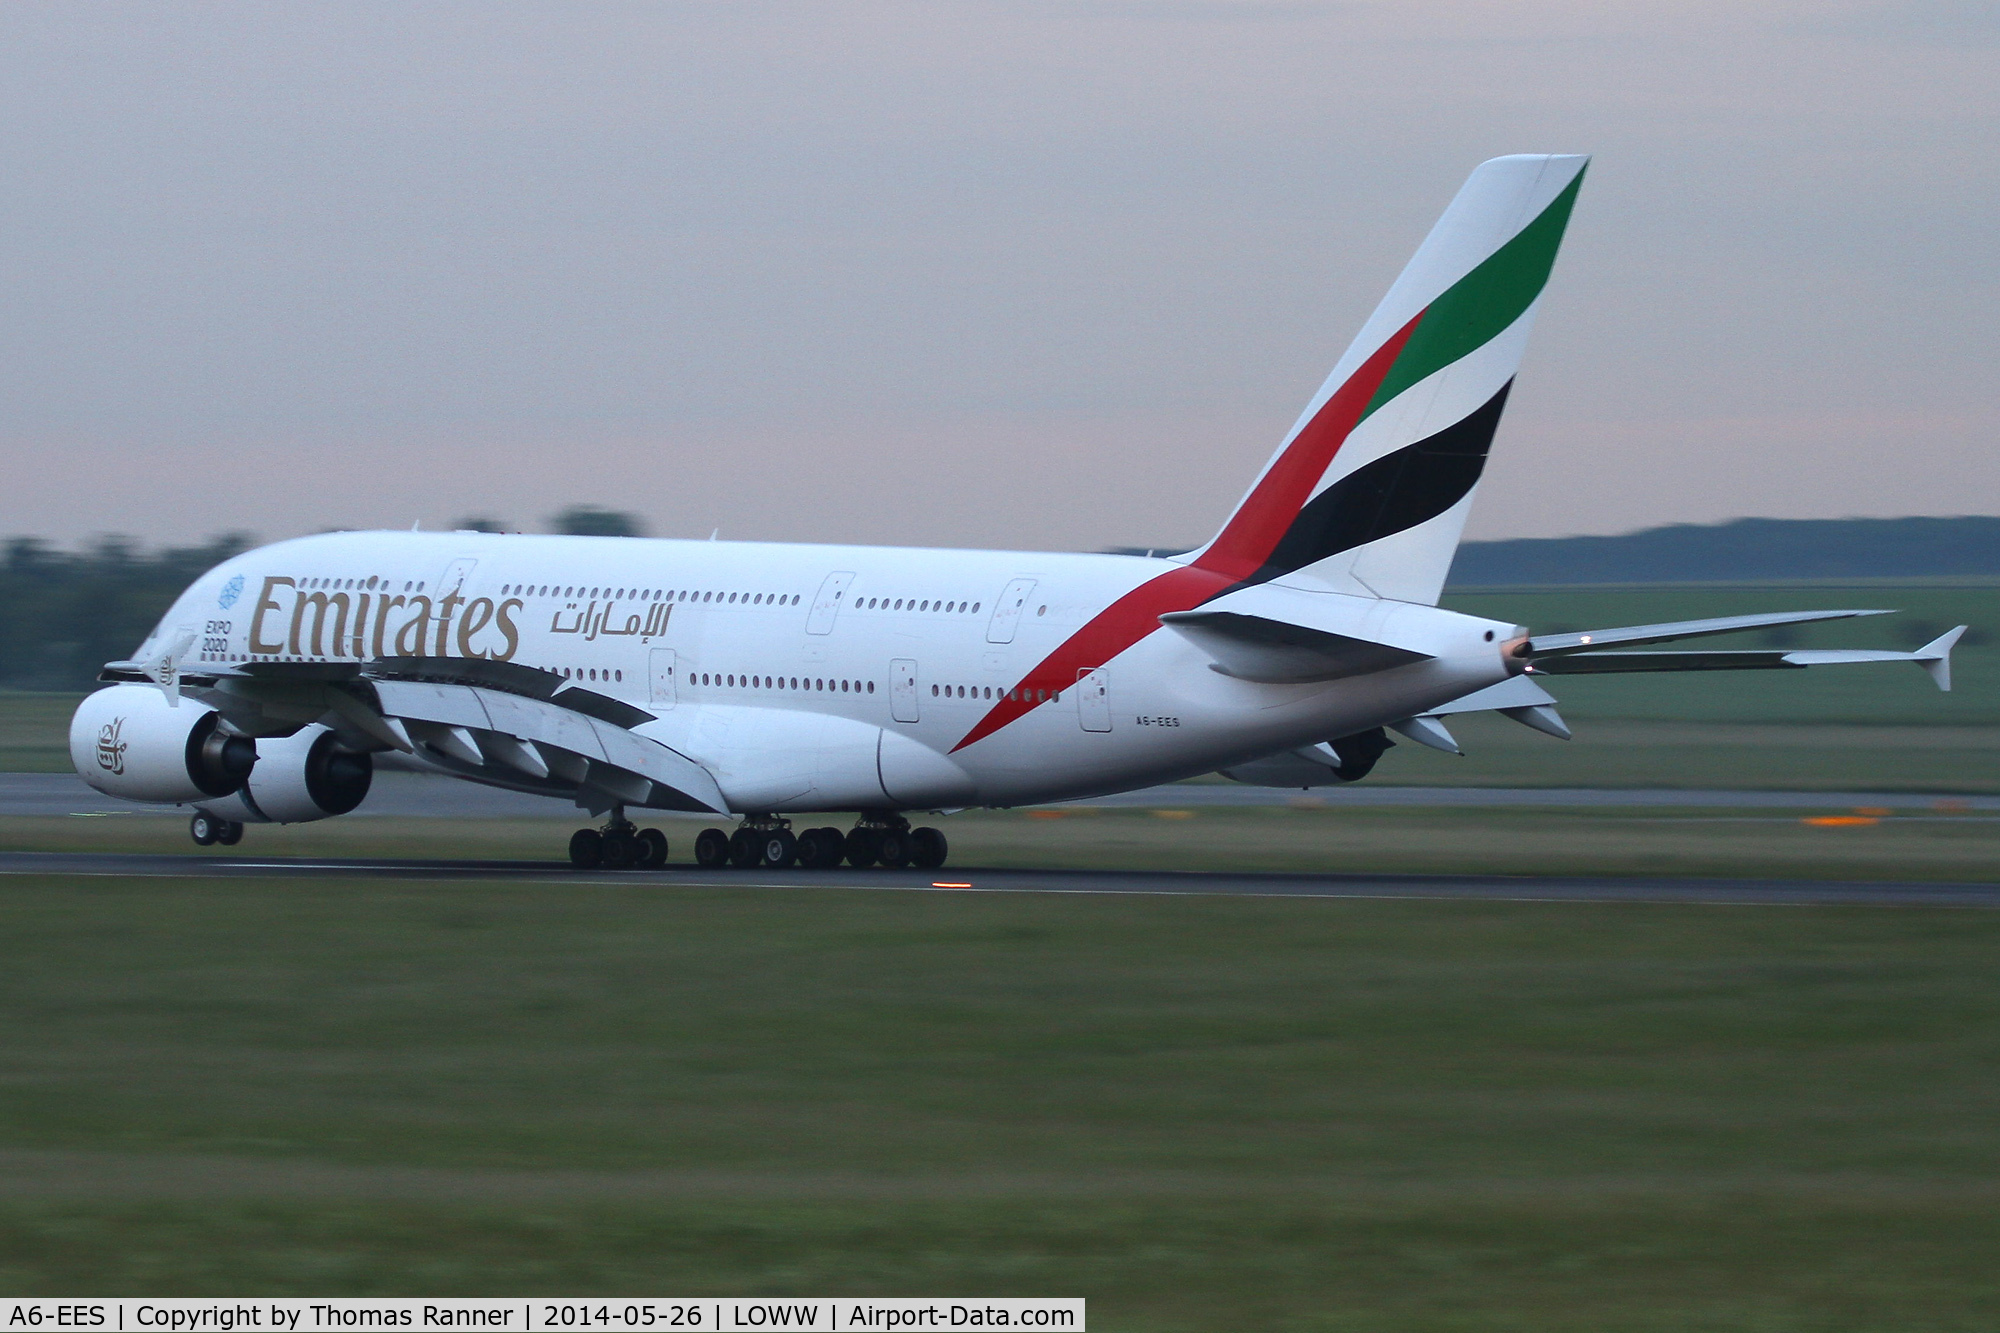 A6-EES, 2013 Airbus A380-861 C/N 140, Emirates A380